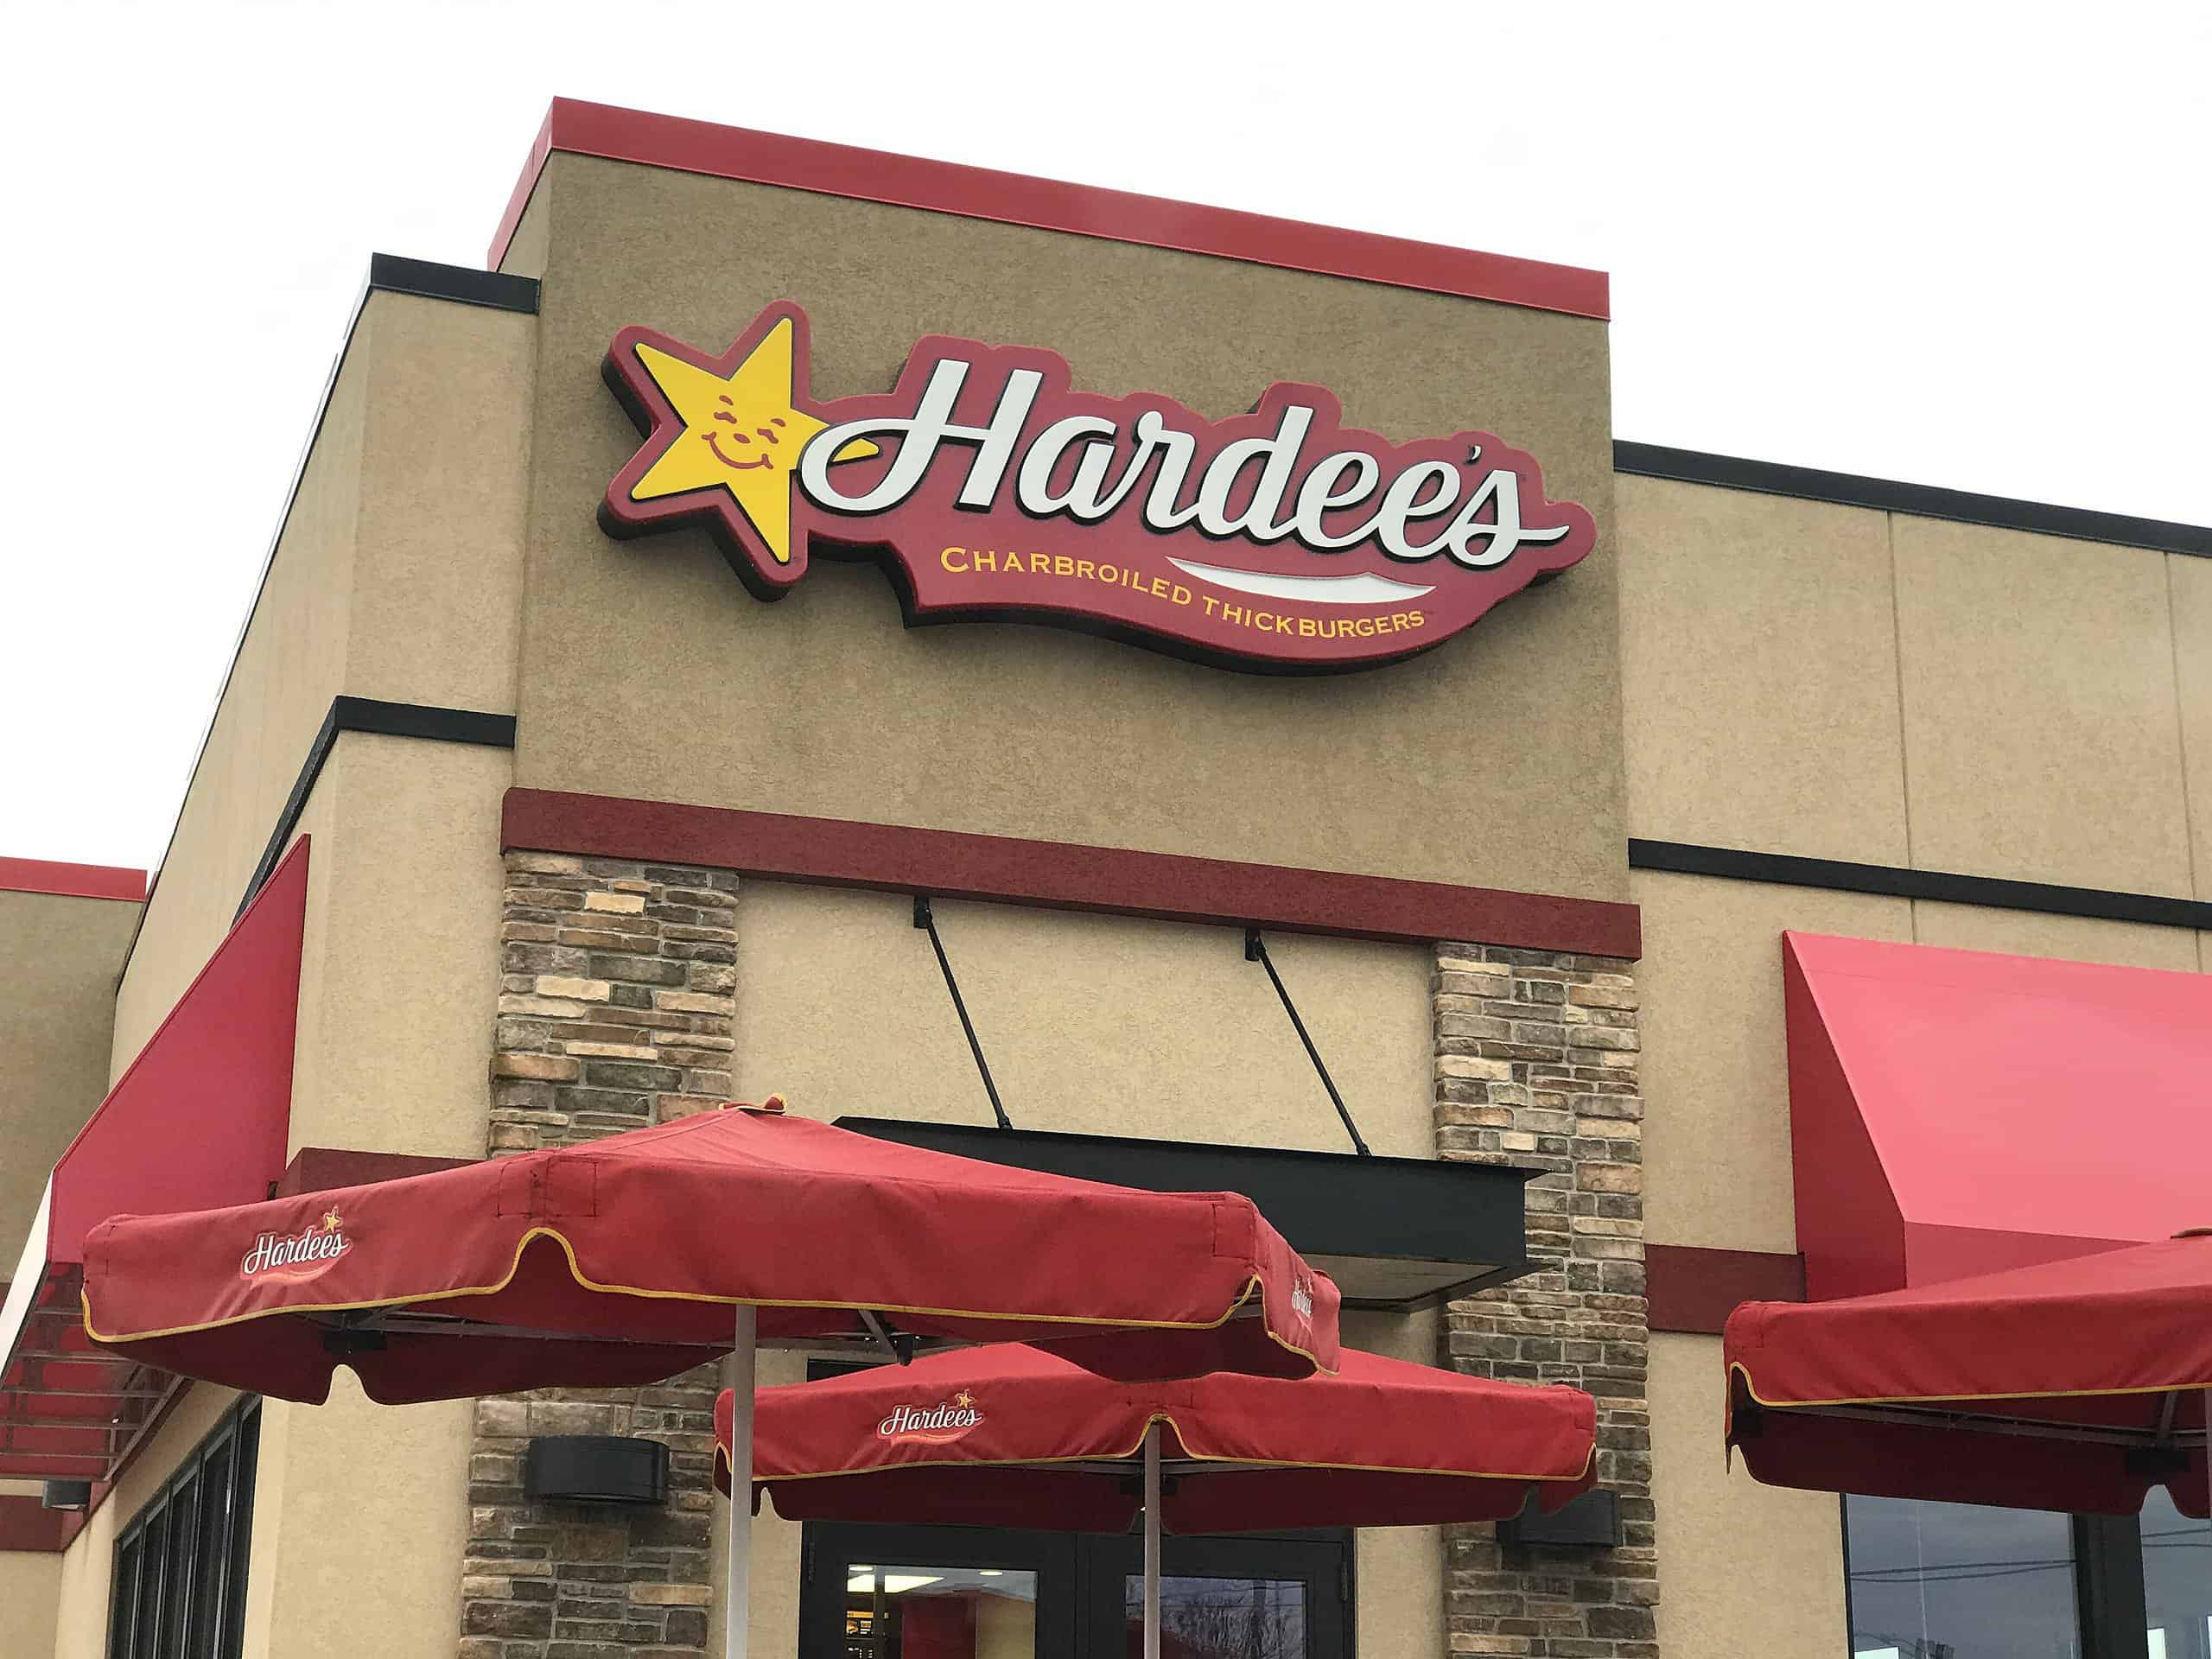 Hardees by Michael Steeber from USA